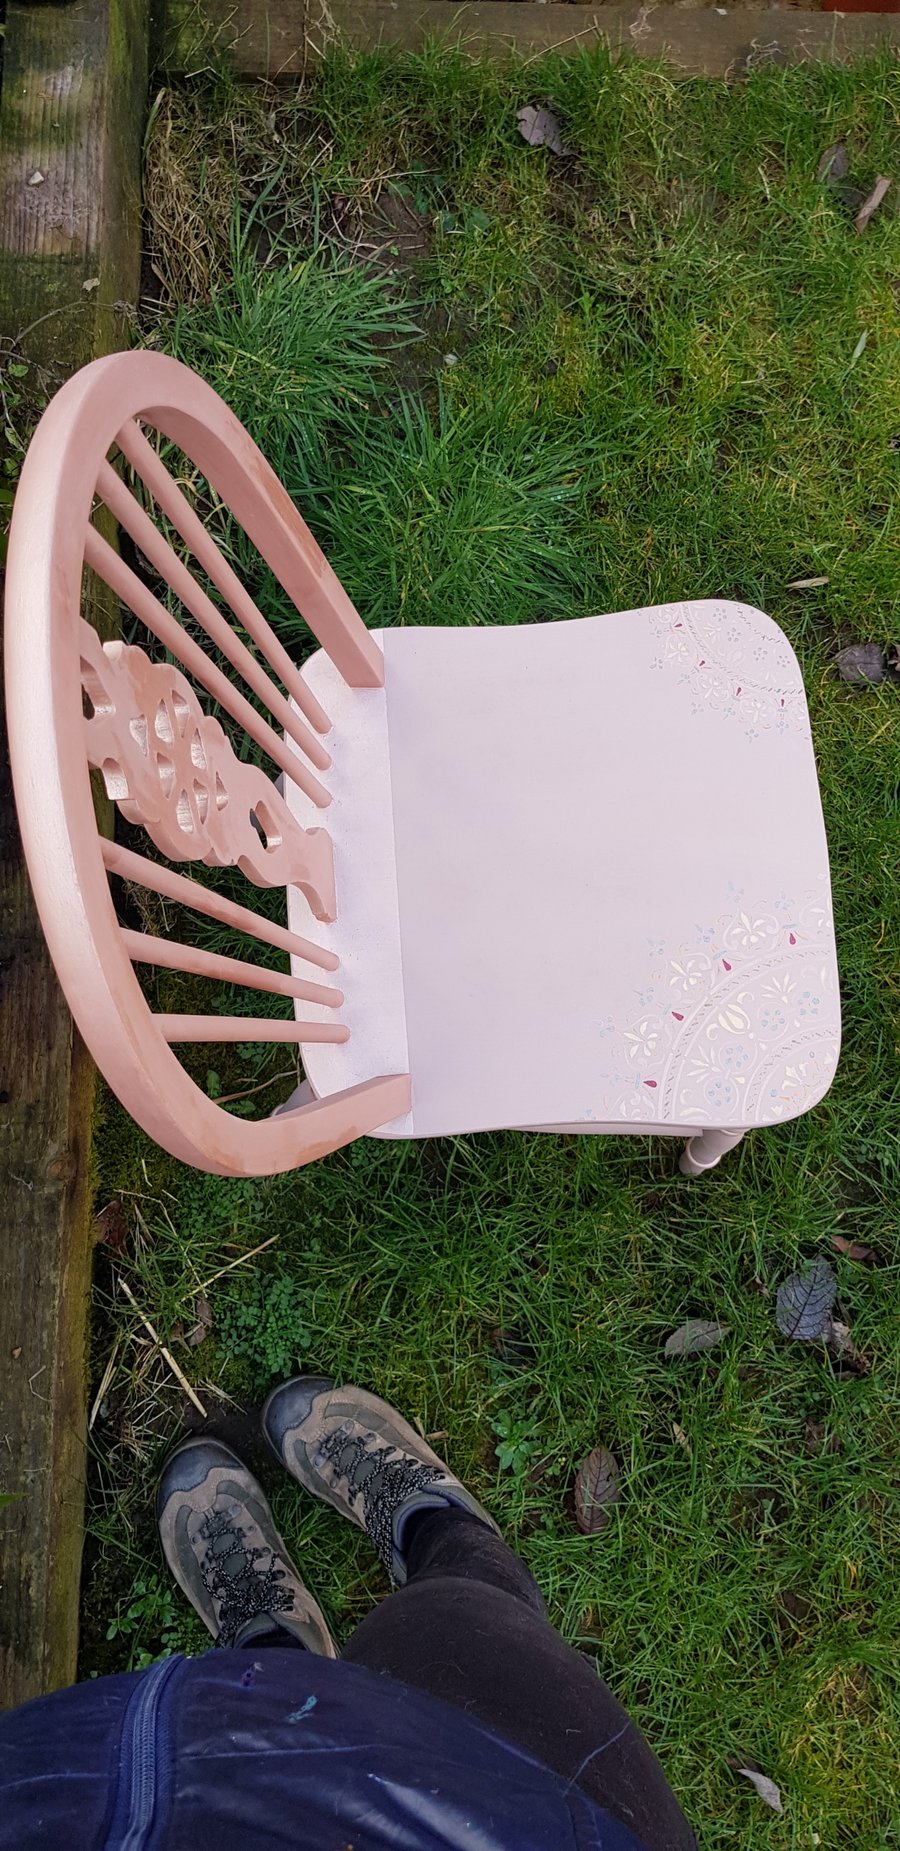 Hand painted upcycled chair with mandala stencil